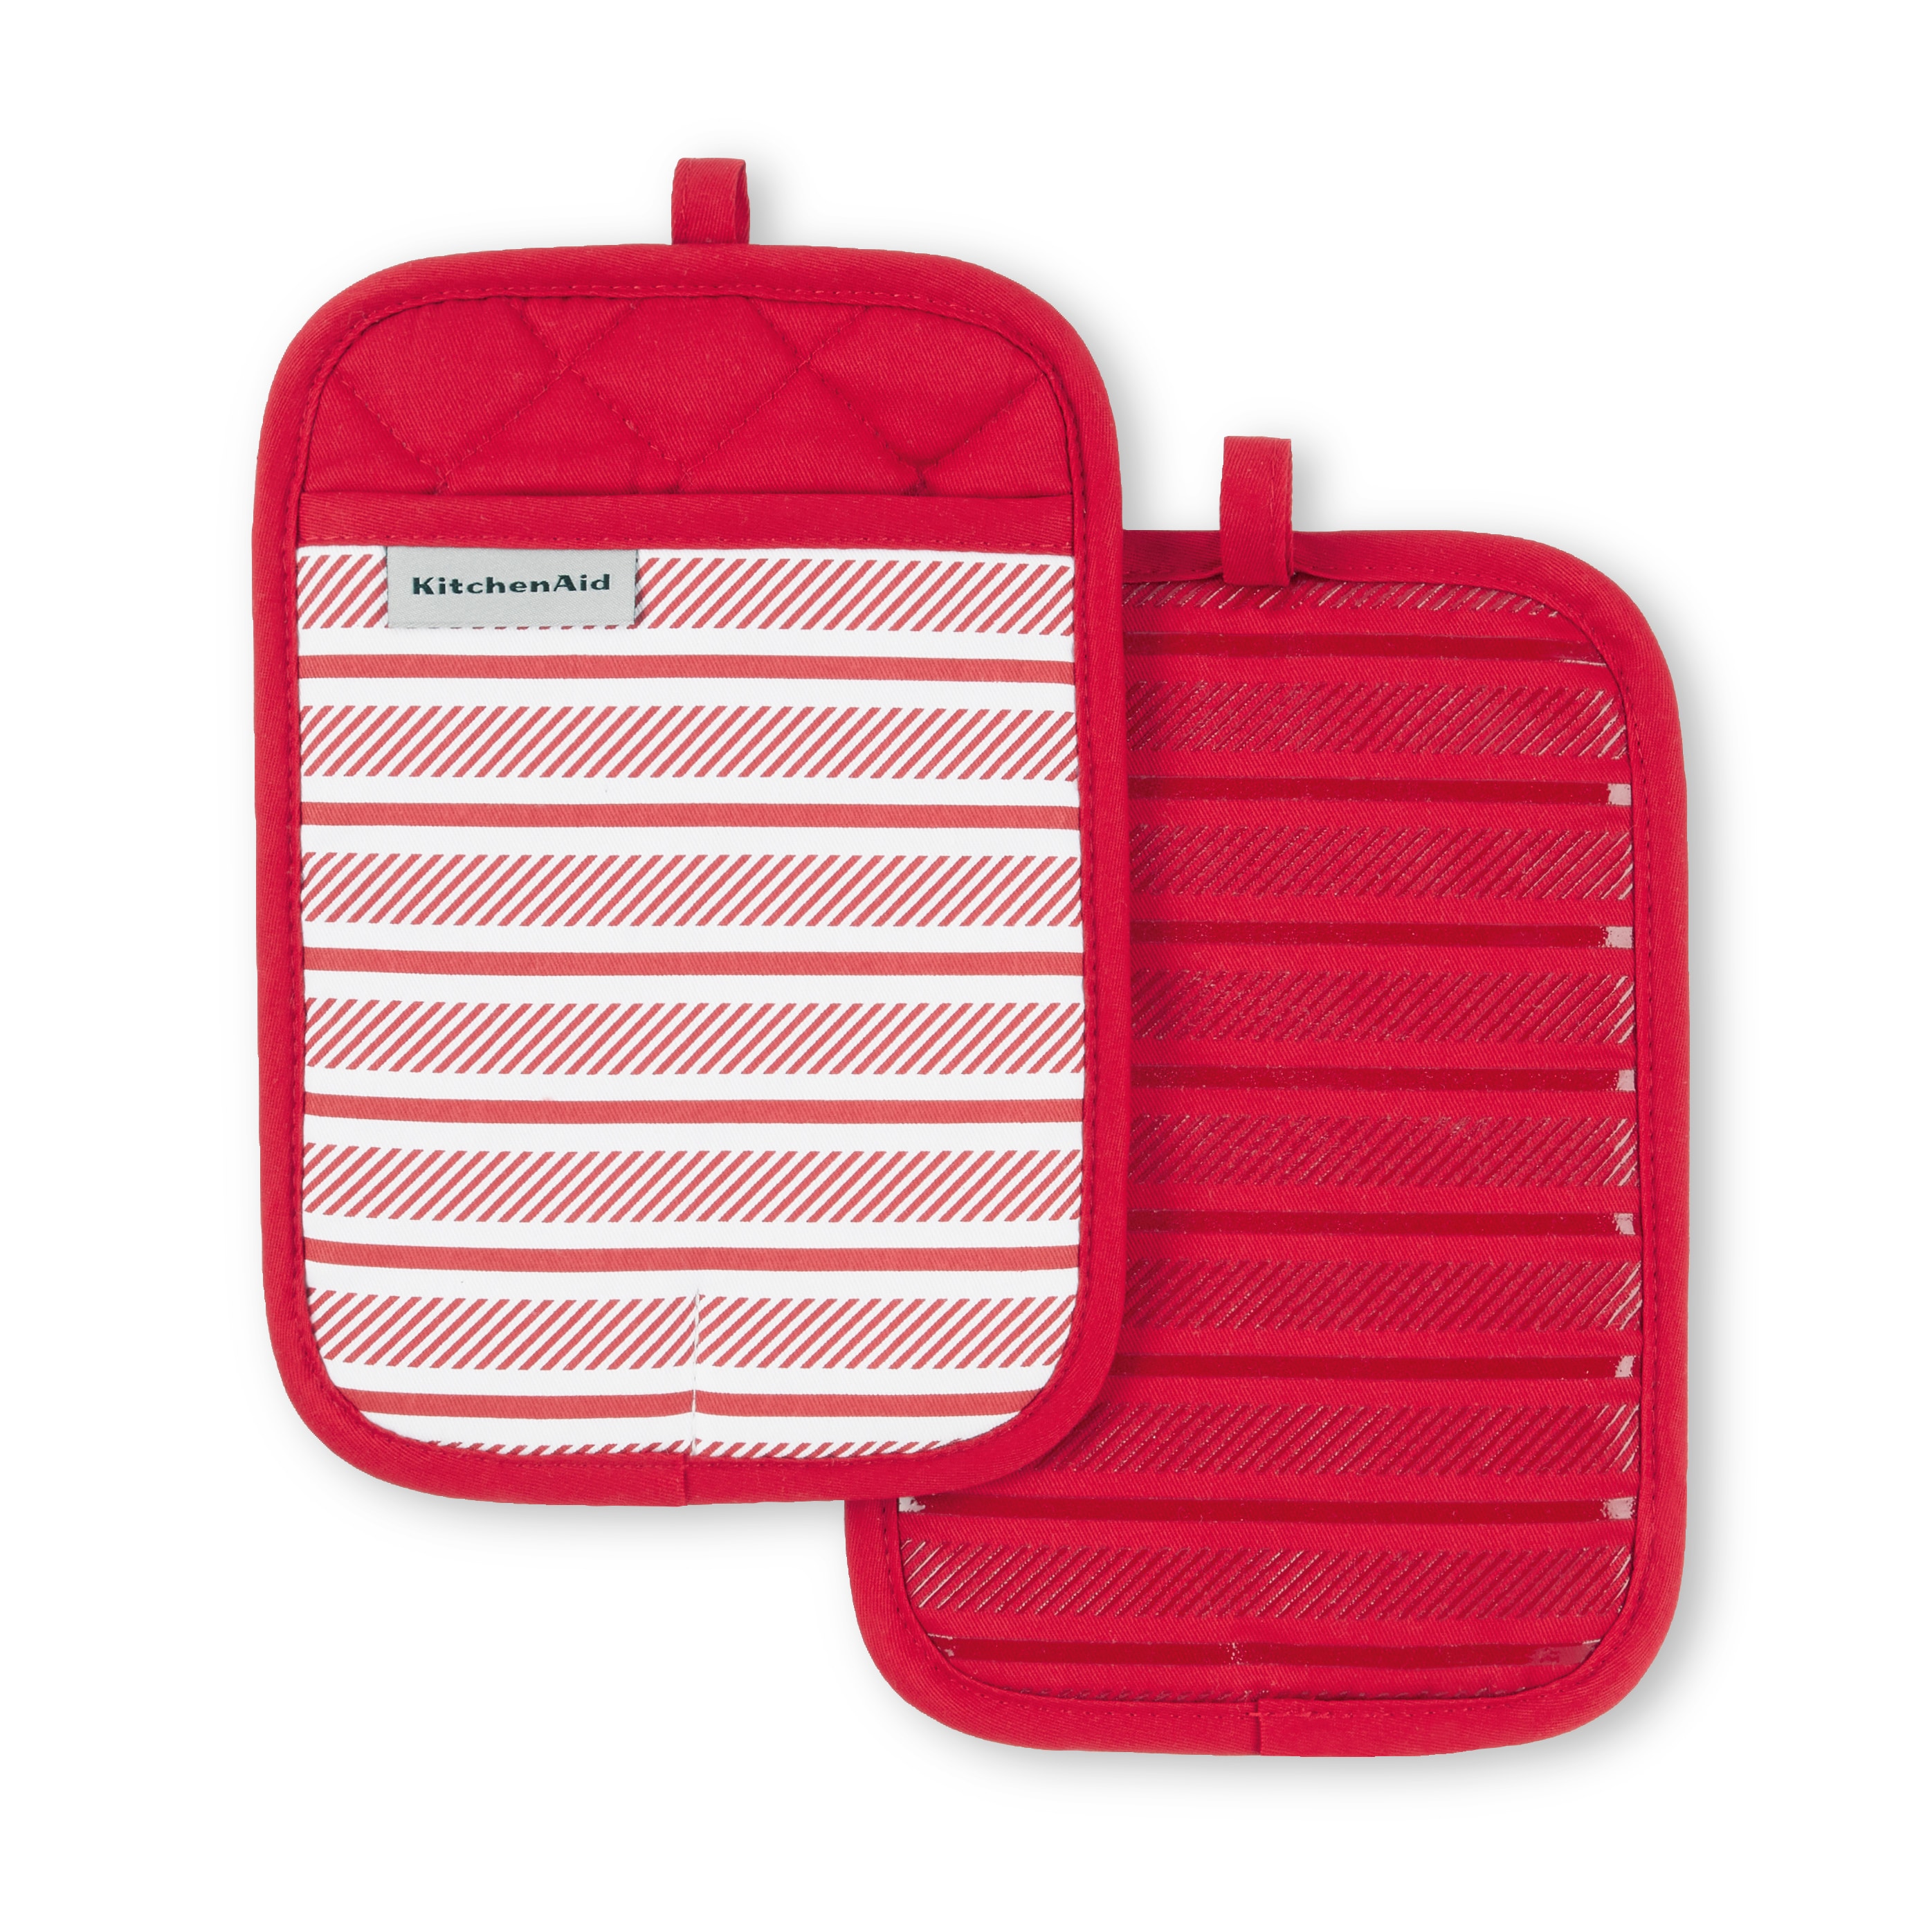 KitchenAid Albany Pot Holder Set - 2 Pack - Durable Heat Resistant Cotton -  Slip-Resistant Silicone Grip - Off-white Milkshake Color - 7x10 Inches in  the Kitchen Towels department at